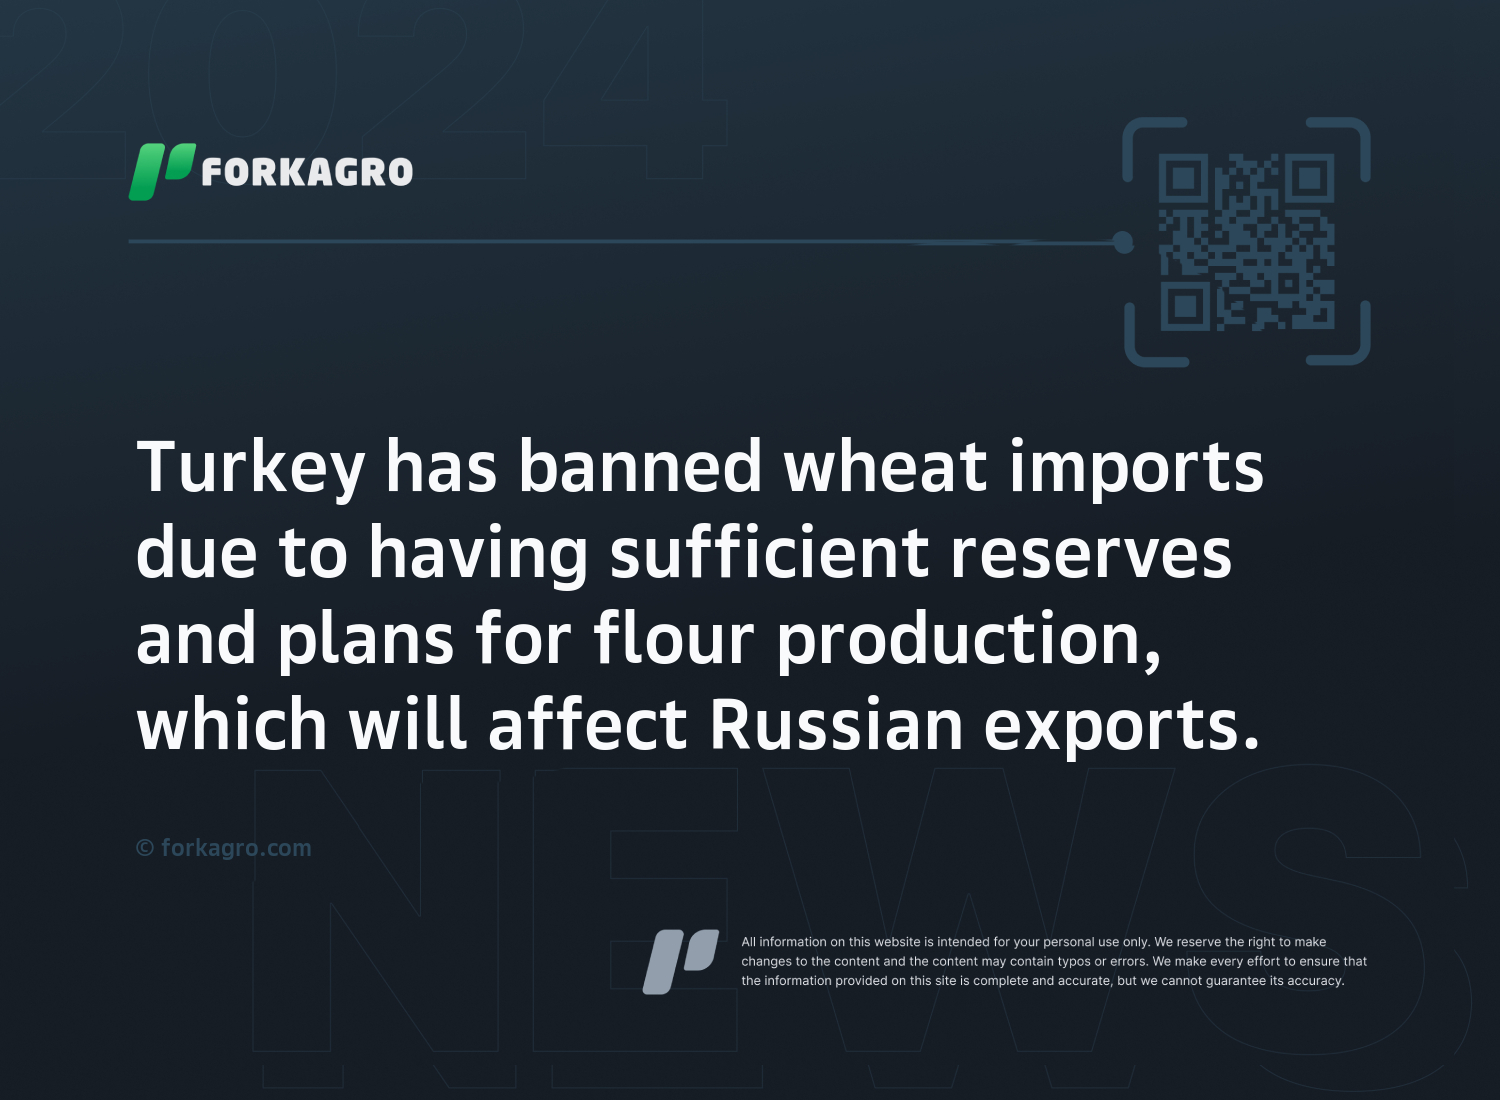 Turkey has banned wheat imports due to having sufficient reserves and plans for flour production, which will affect Russian exports.